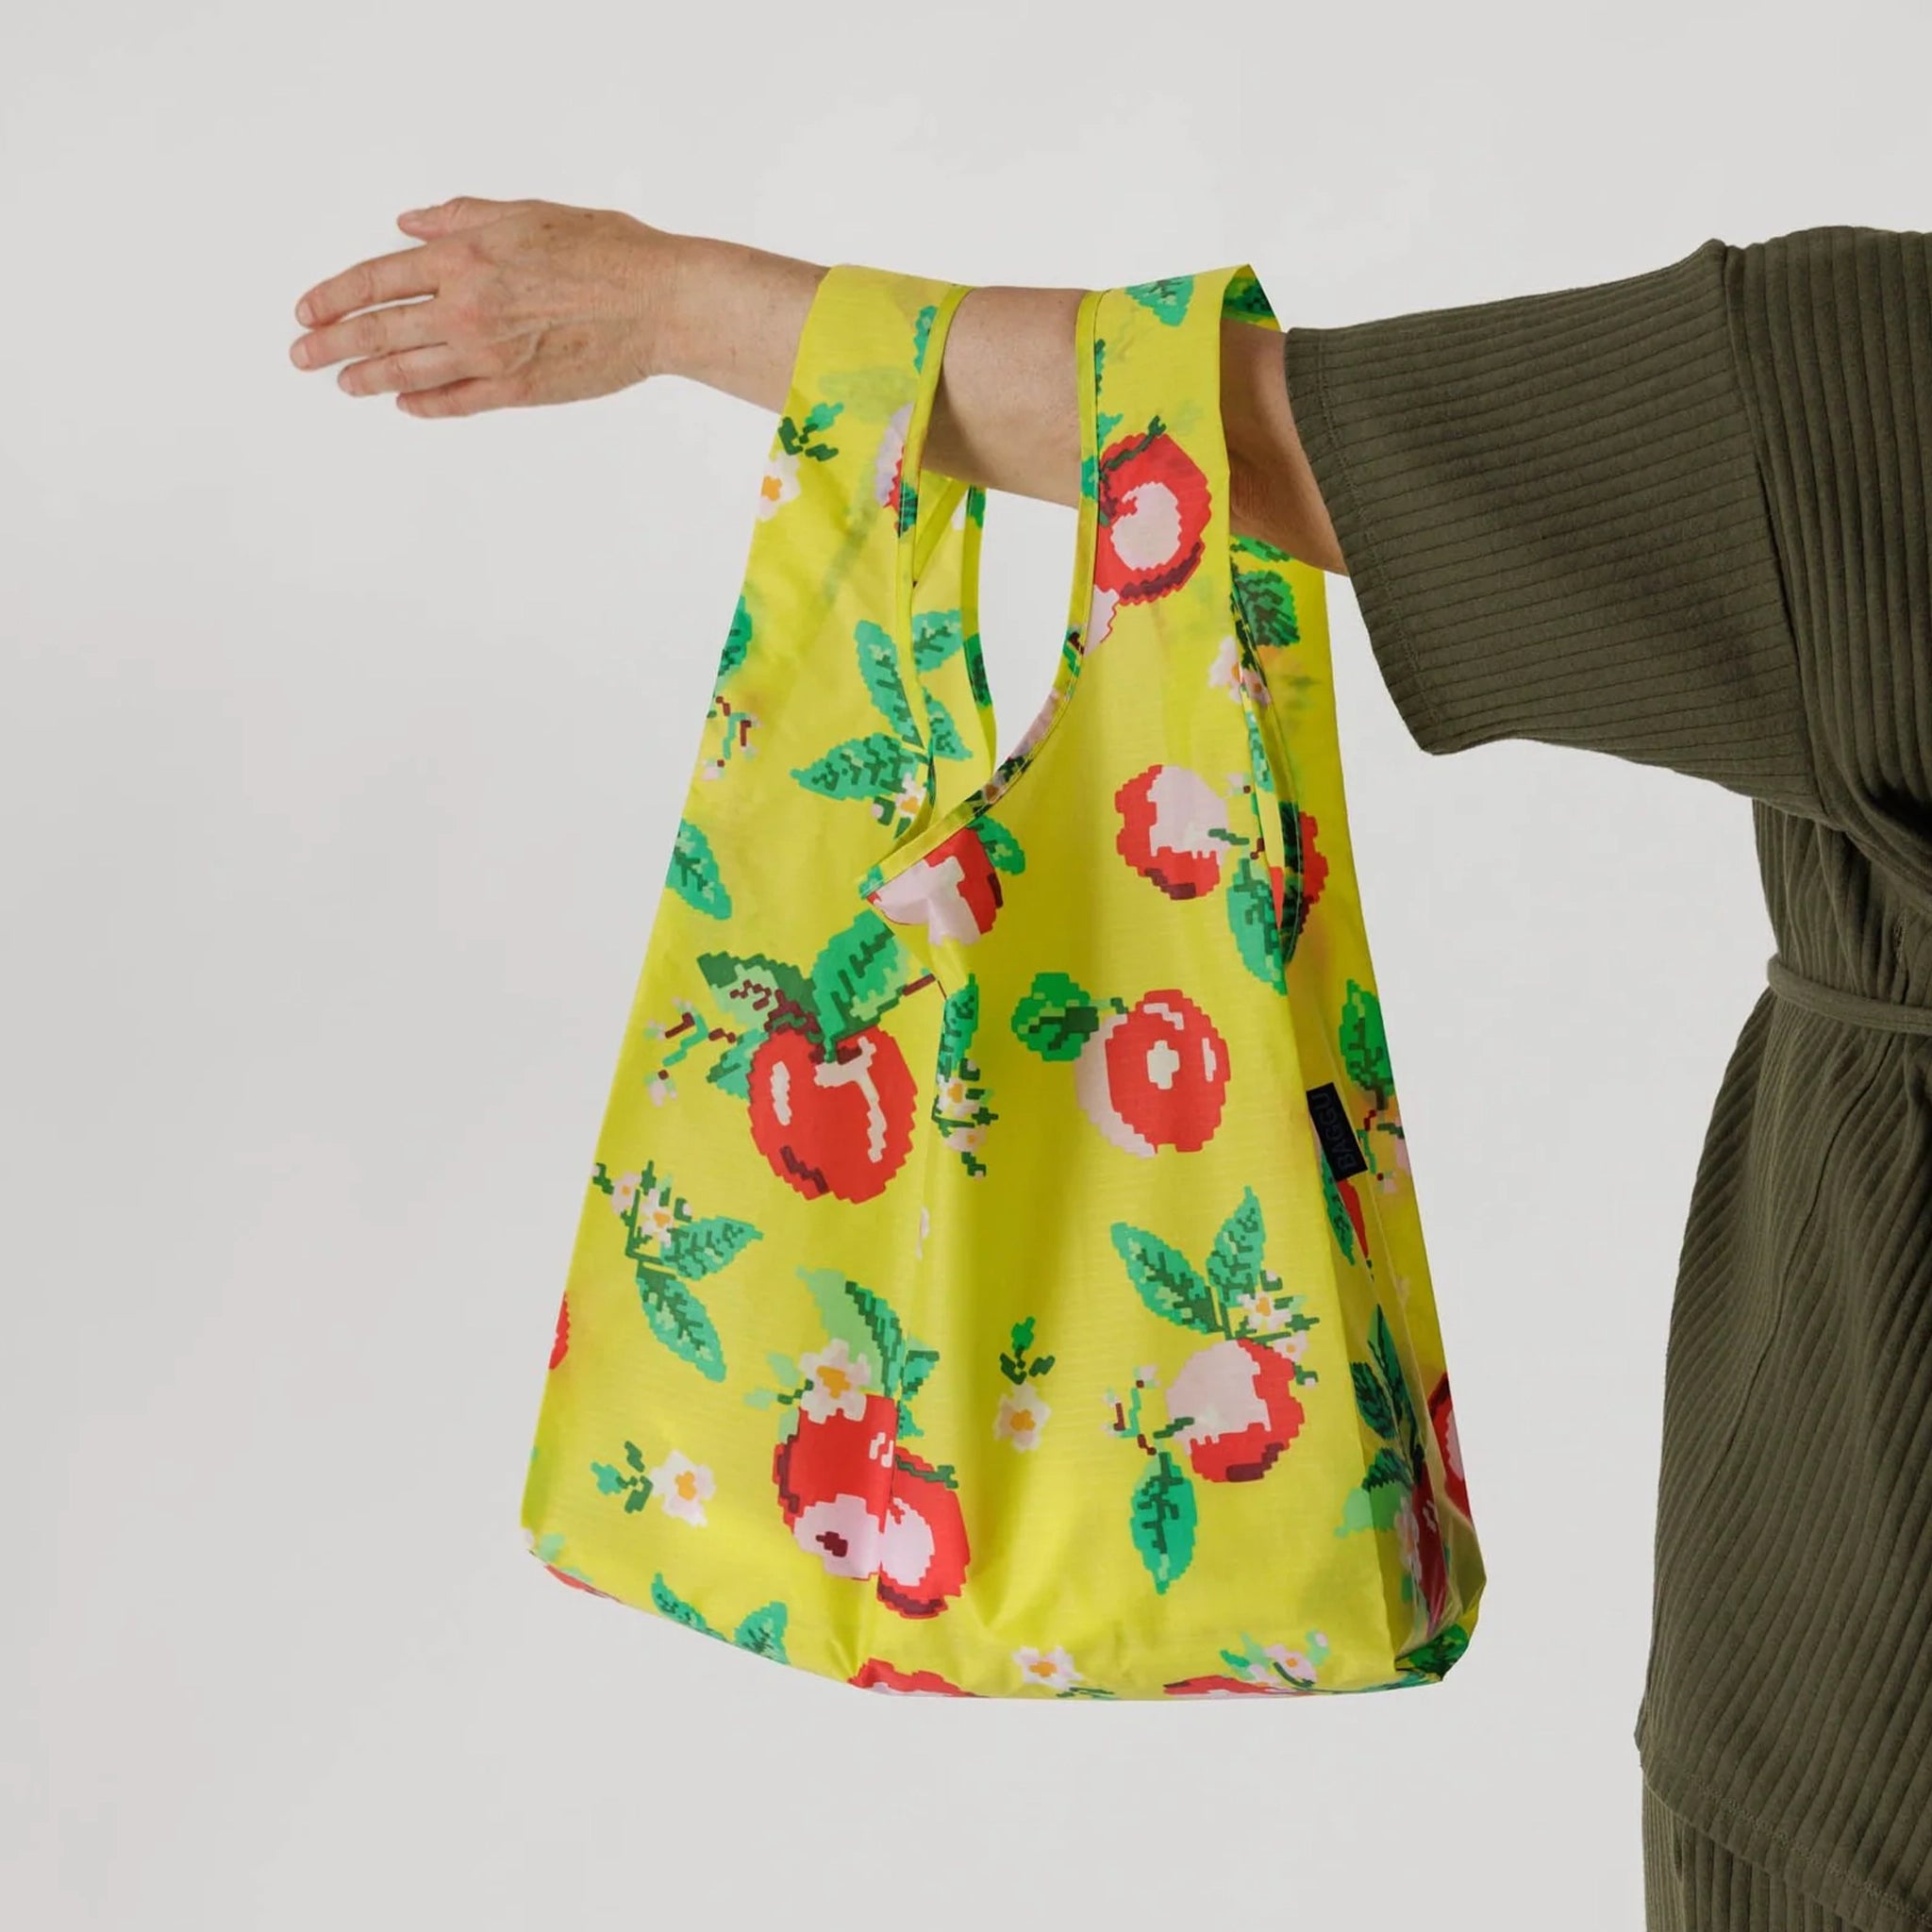 On a grey background is a neon green nylon bag with a red apple pattern. 